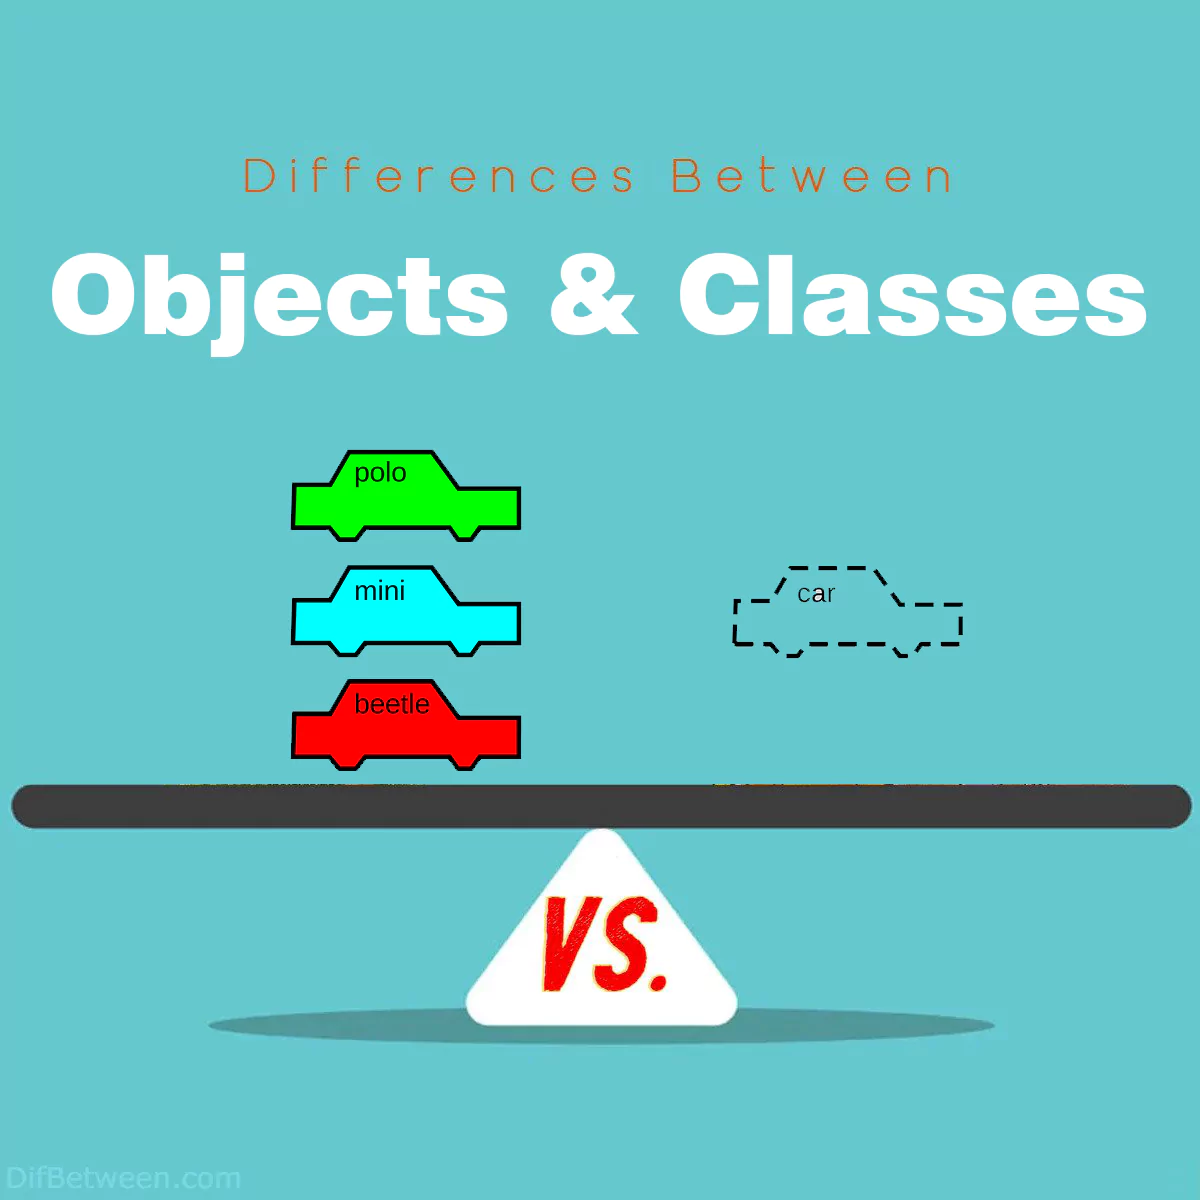 Differences Between Objects and Classes